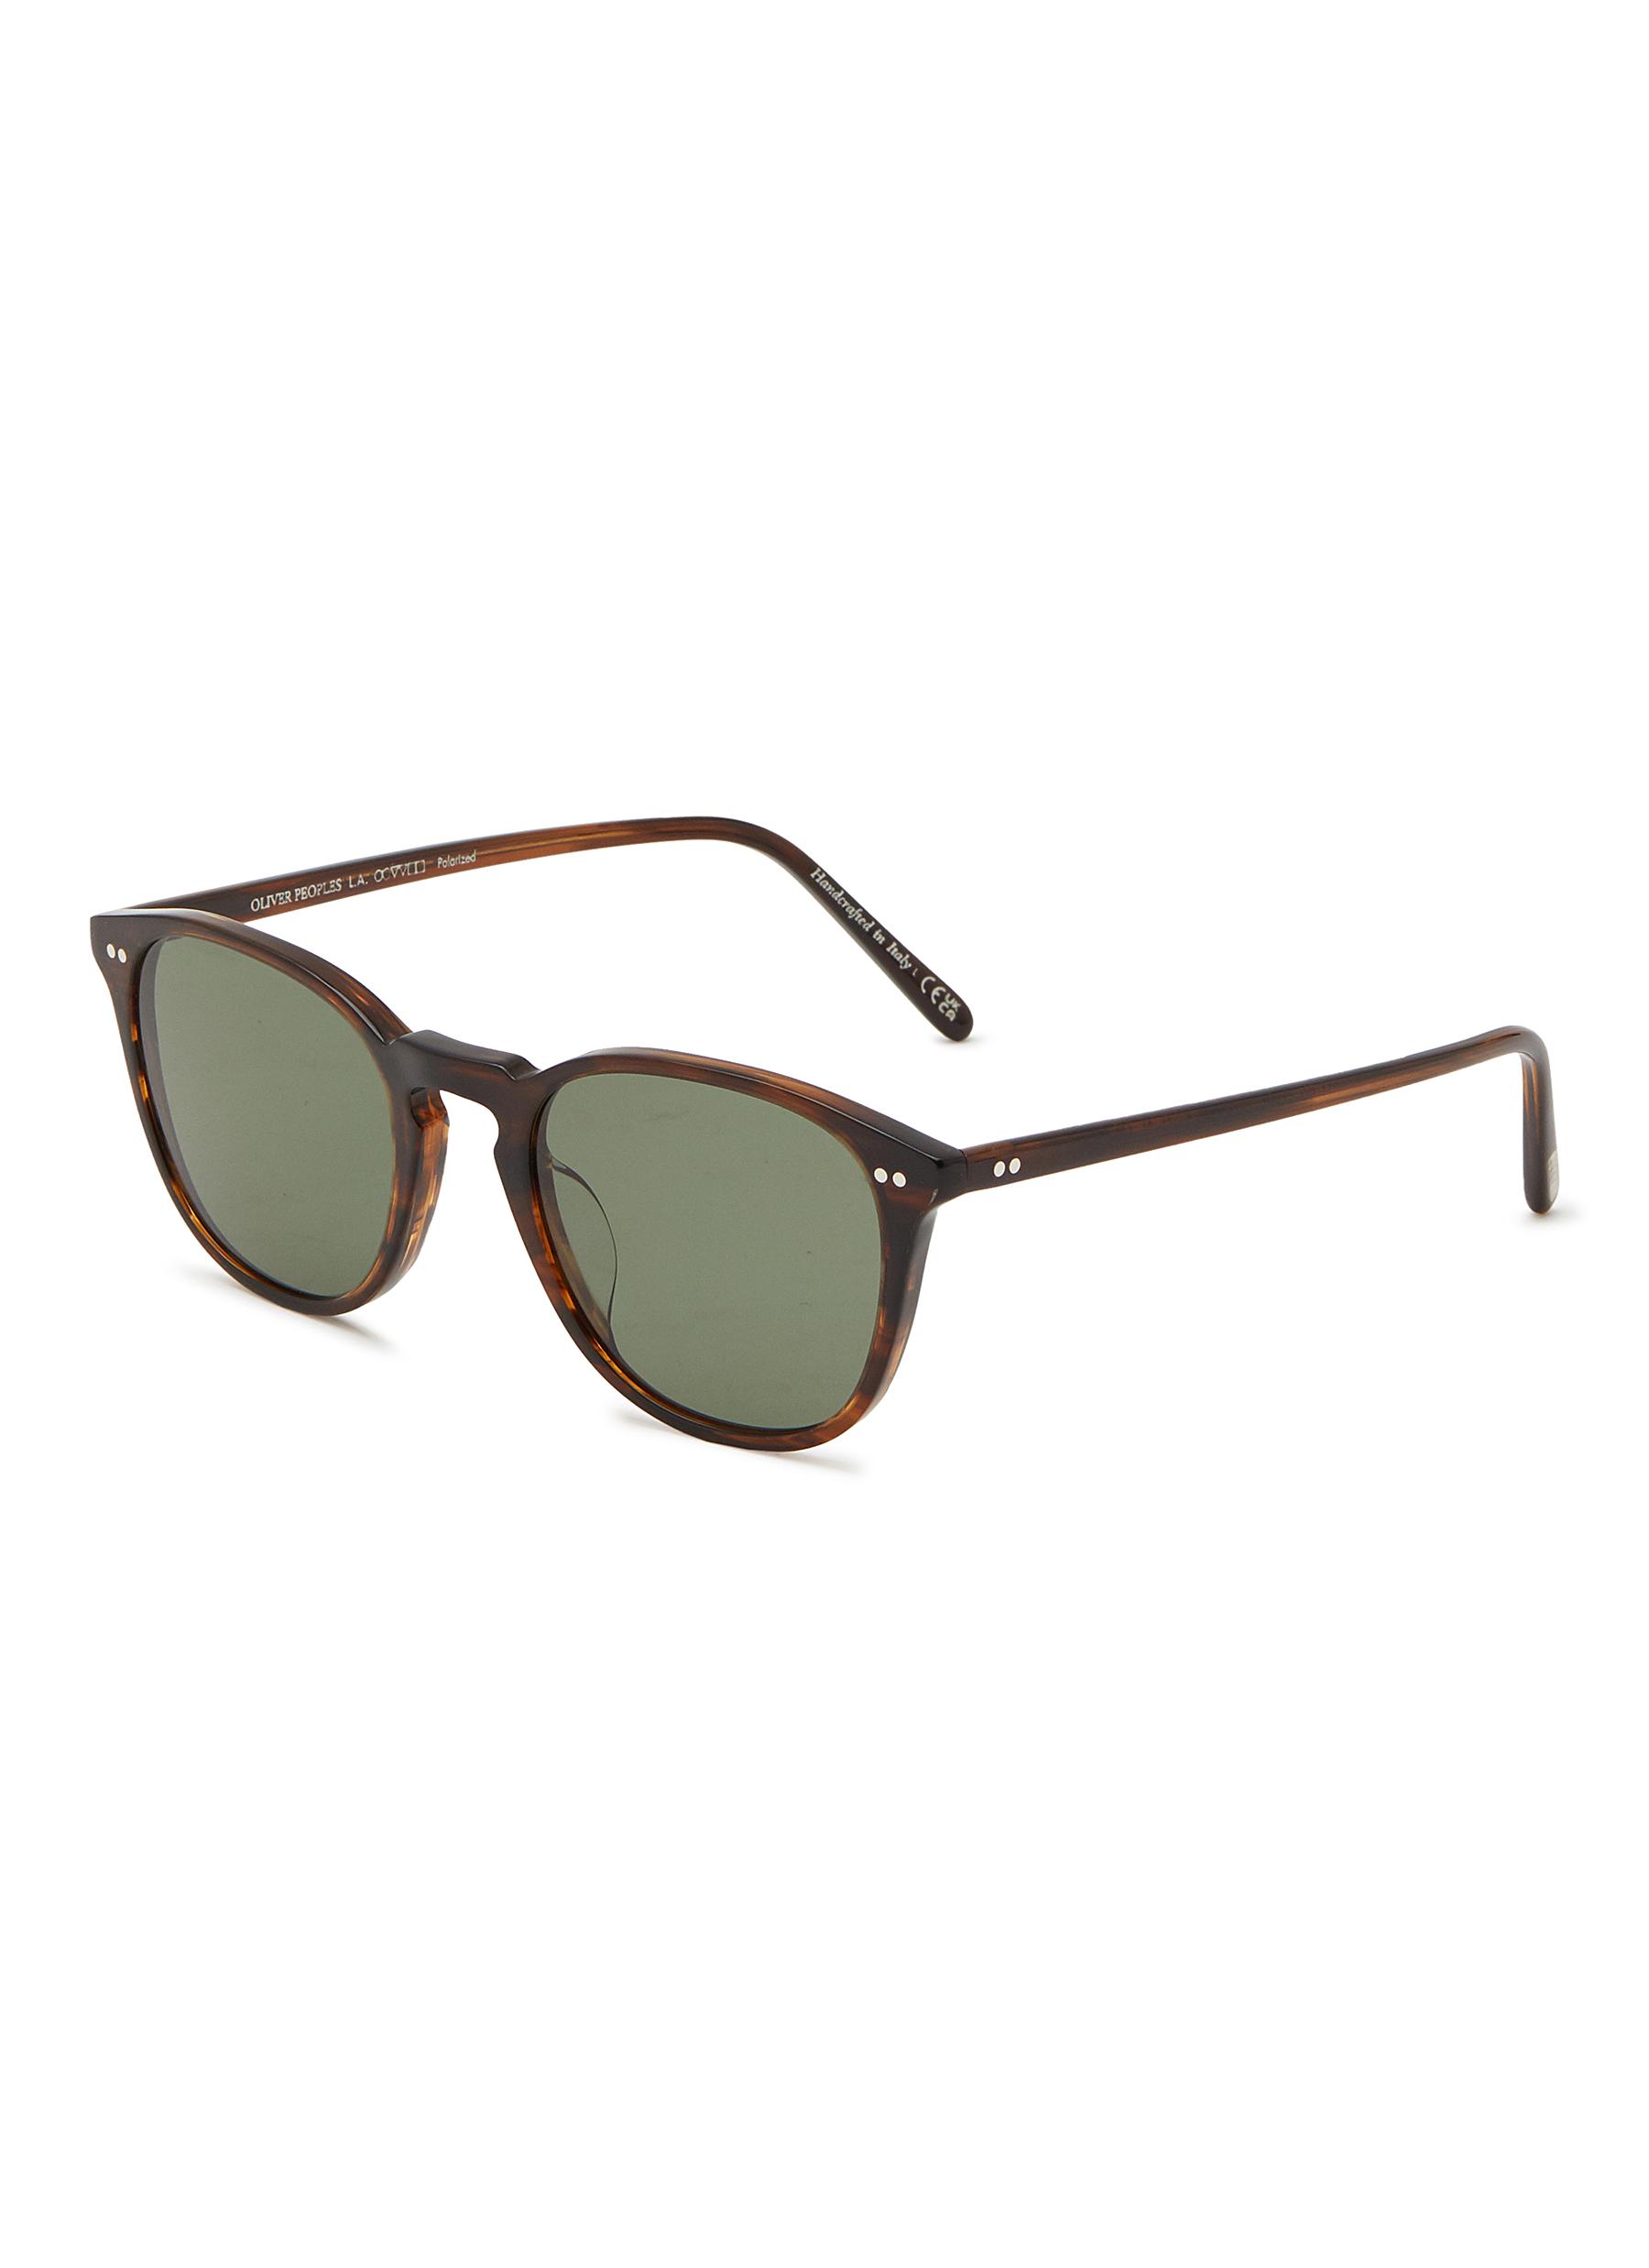 OLIVER PEOPLES ACCESSORIES ‘FORMAN' GREEN LENS ROUND ACETATE FRAME SUNGLASSES